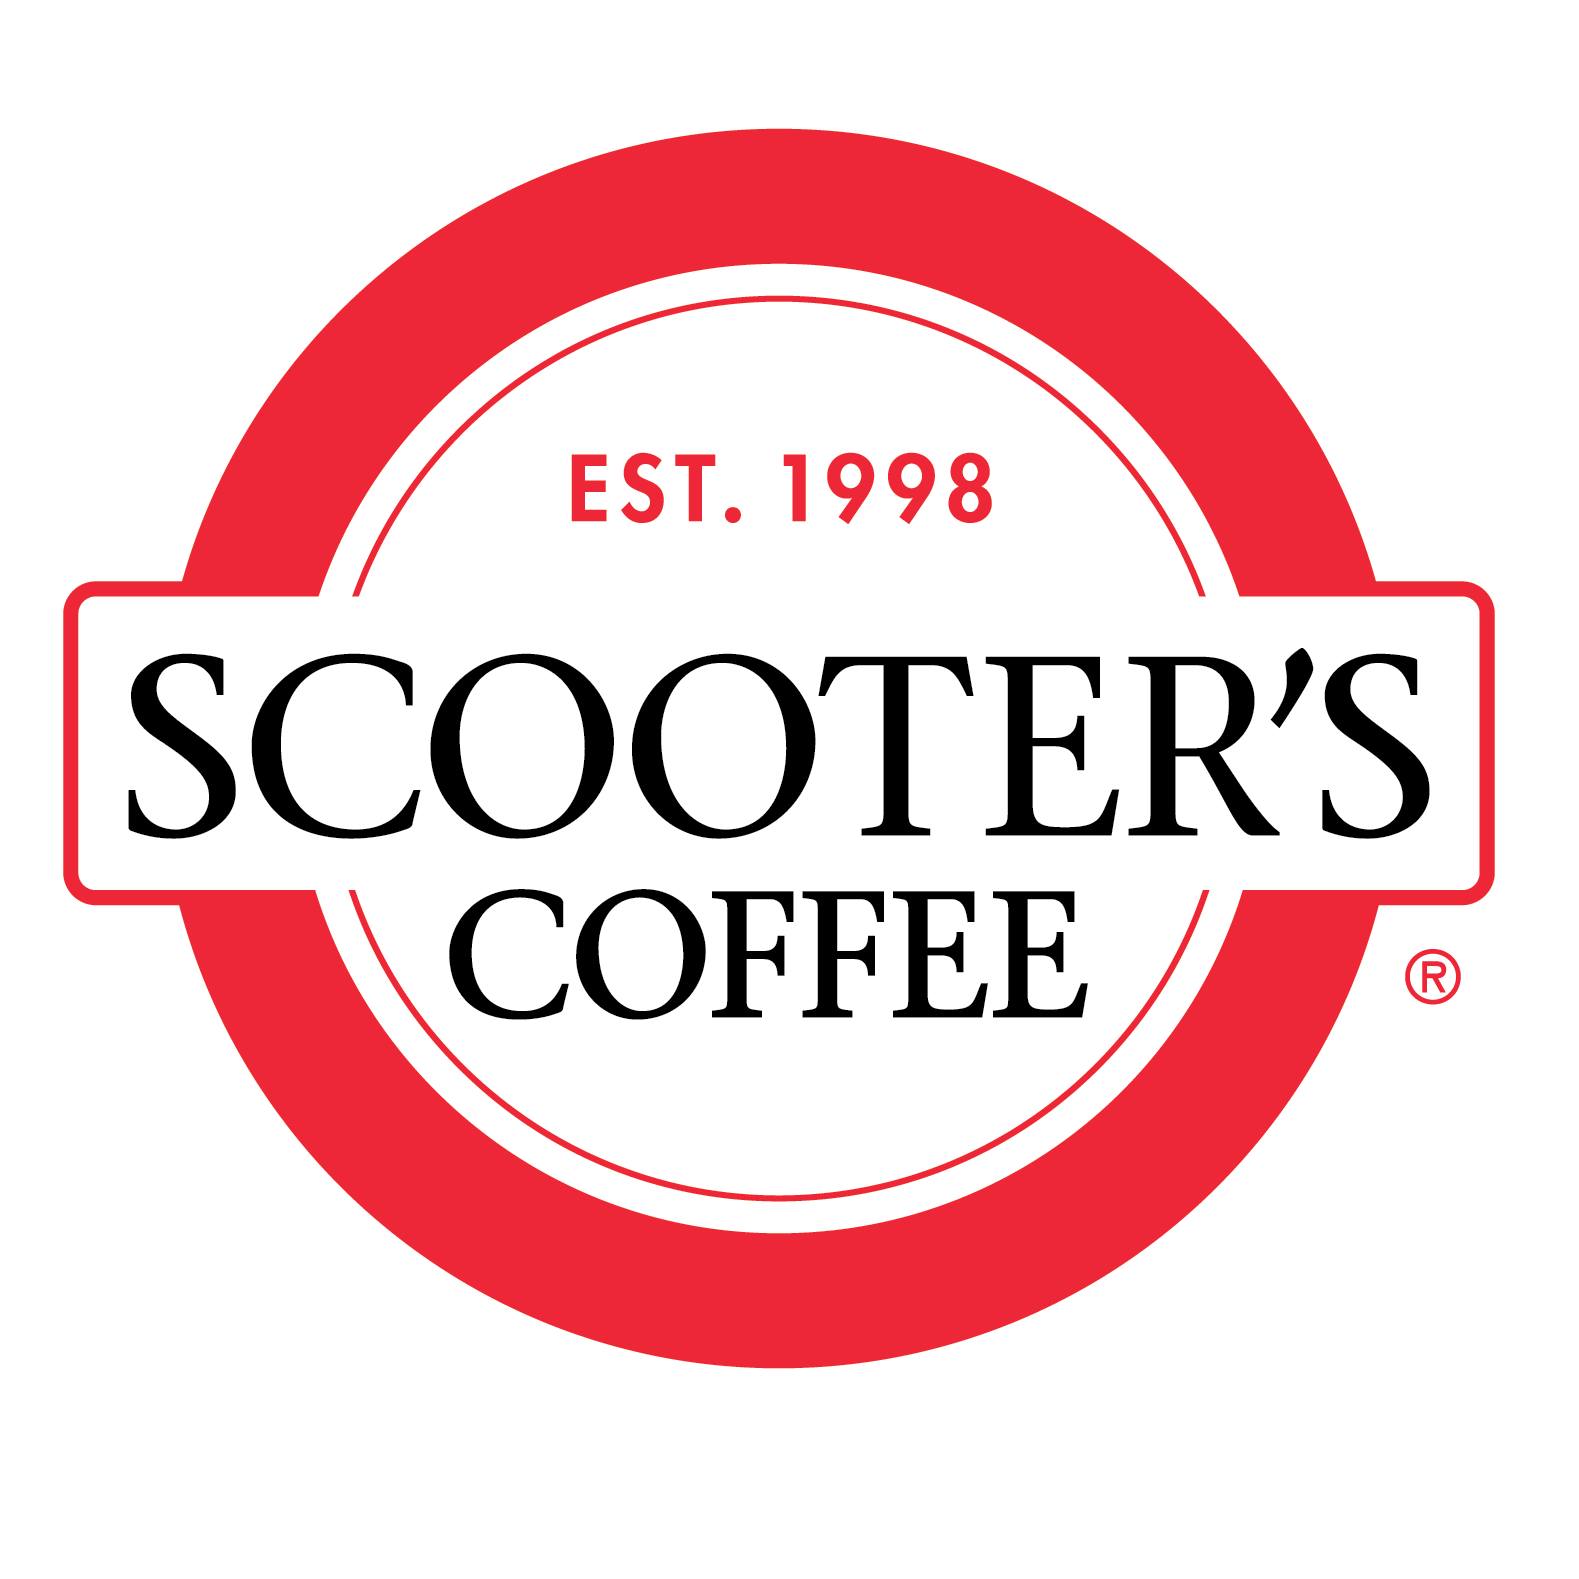 Scooter’s Coffee Opens New Location in Milwaukee, Wisconsin